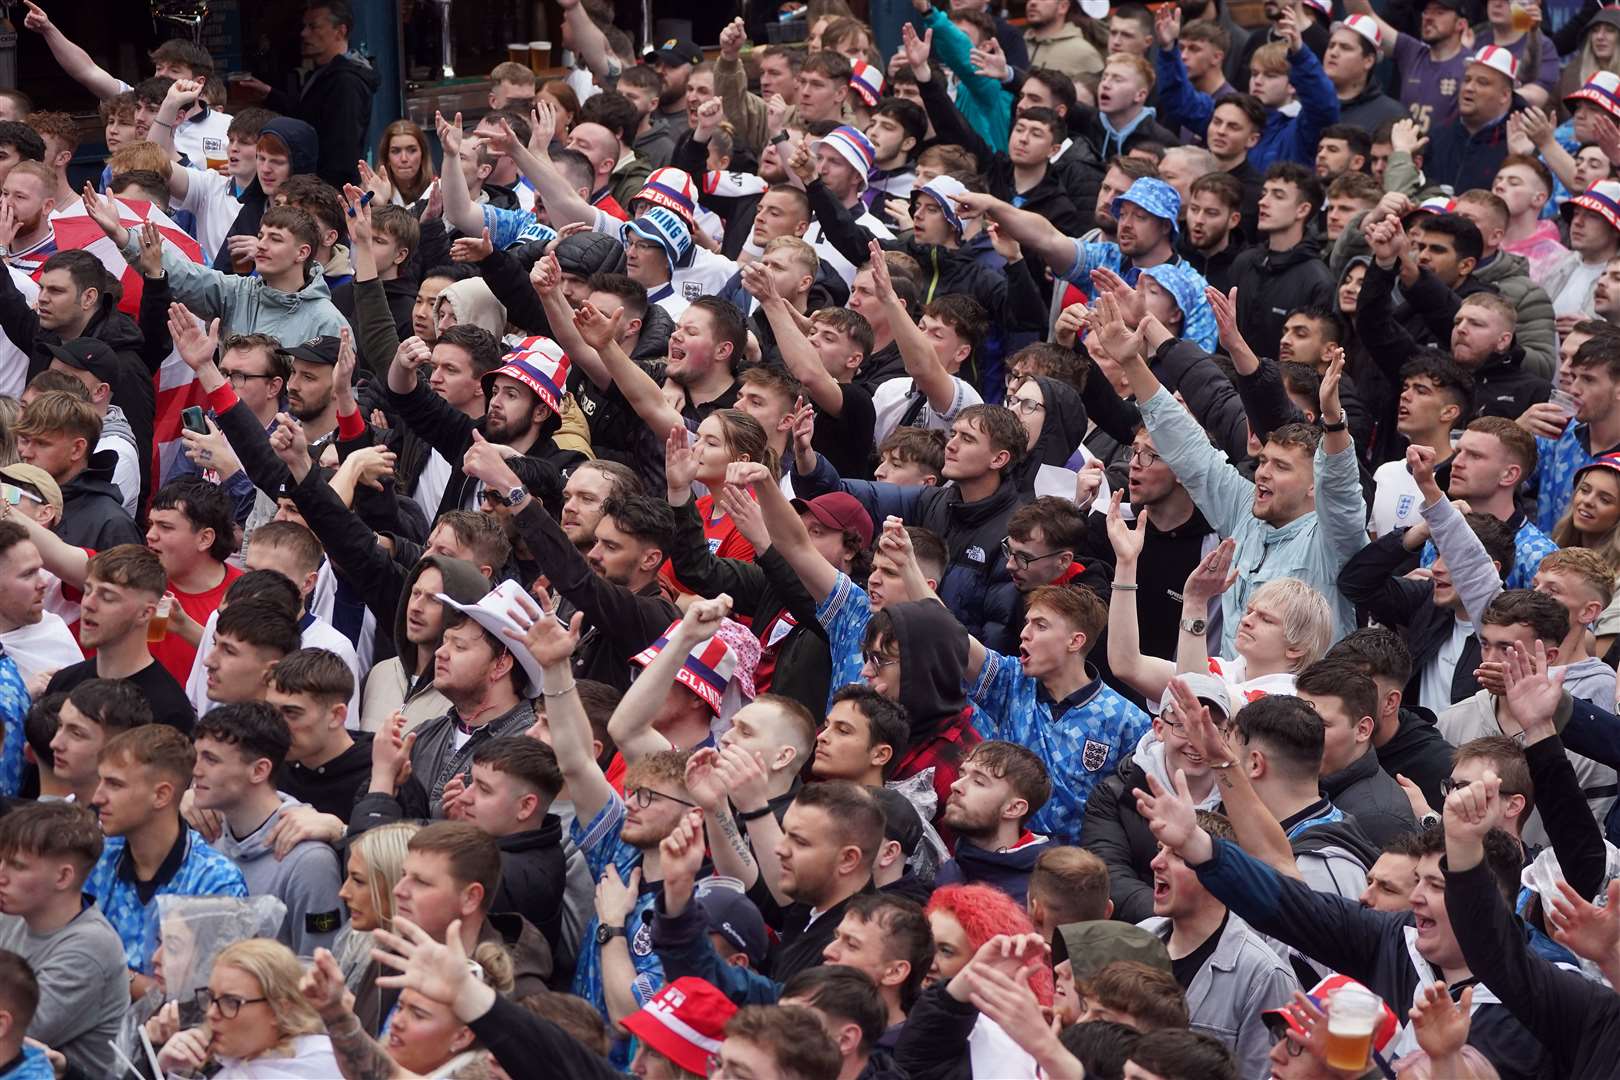 Three Lions fans cheered on England against Serbia from pubs and fan zones across the country (Owen Humphreys/PA)